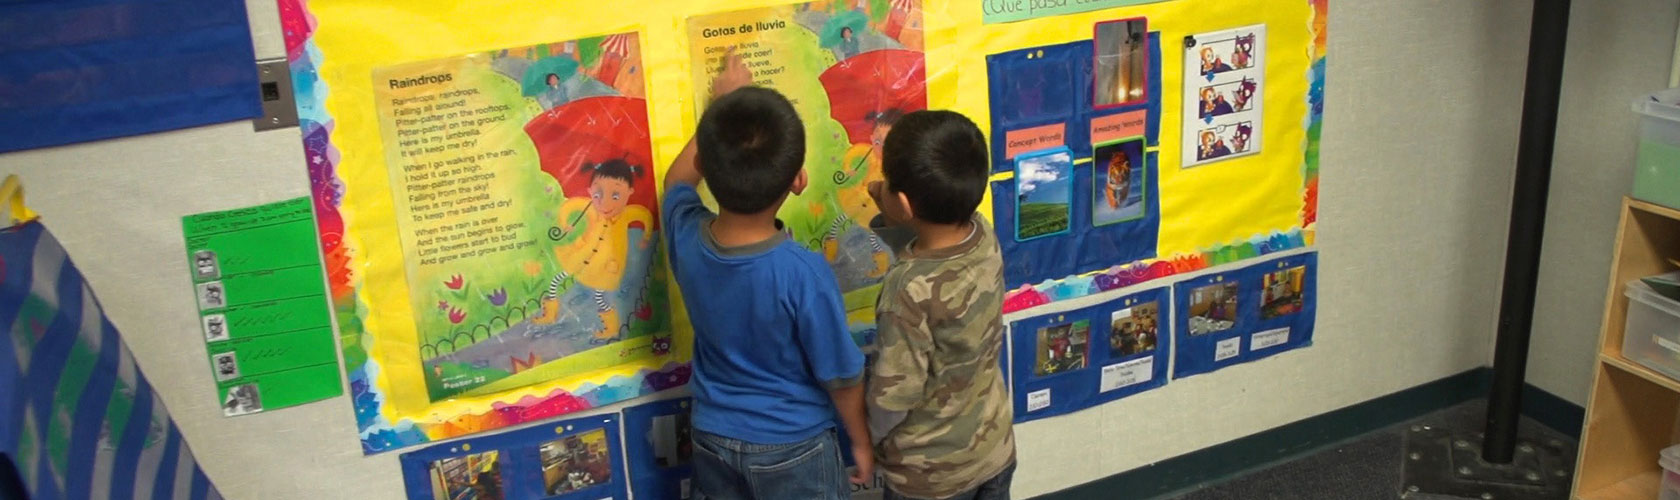 Two preschoolers looking at a colorful poster on the wall.